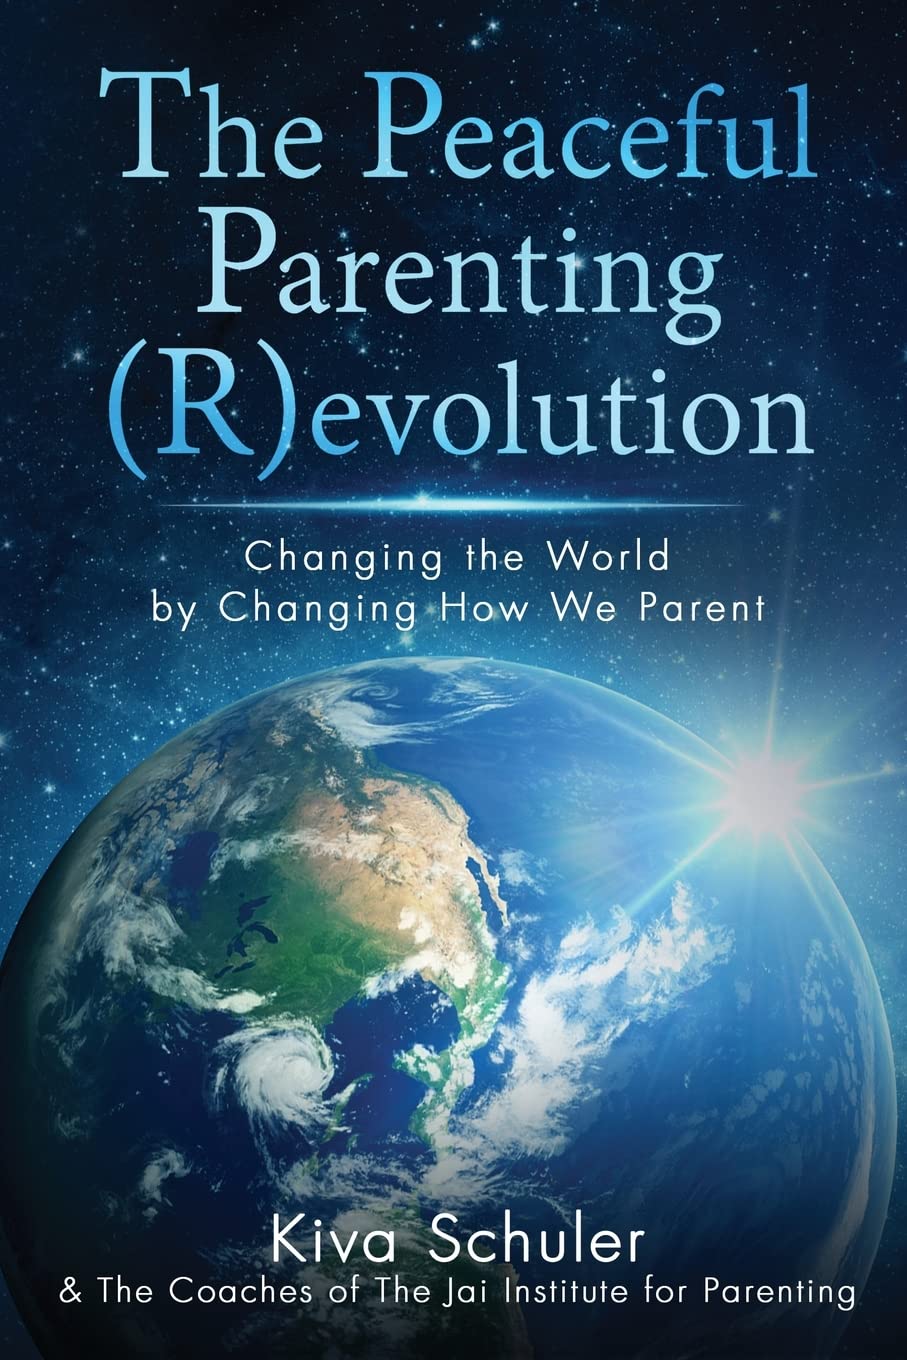 New book "The Peaceful Parenting (R)evolution" by Kiva Schuler is released, a radical new approach to raising children that focuses on emotional intelligence and conscious communication